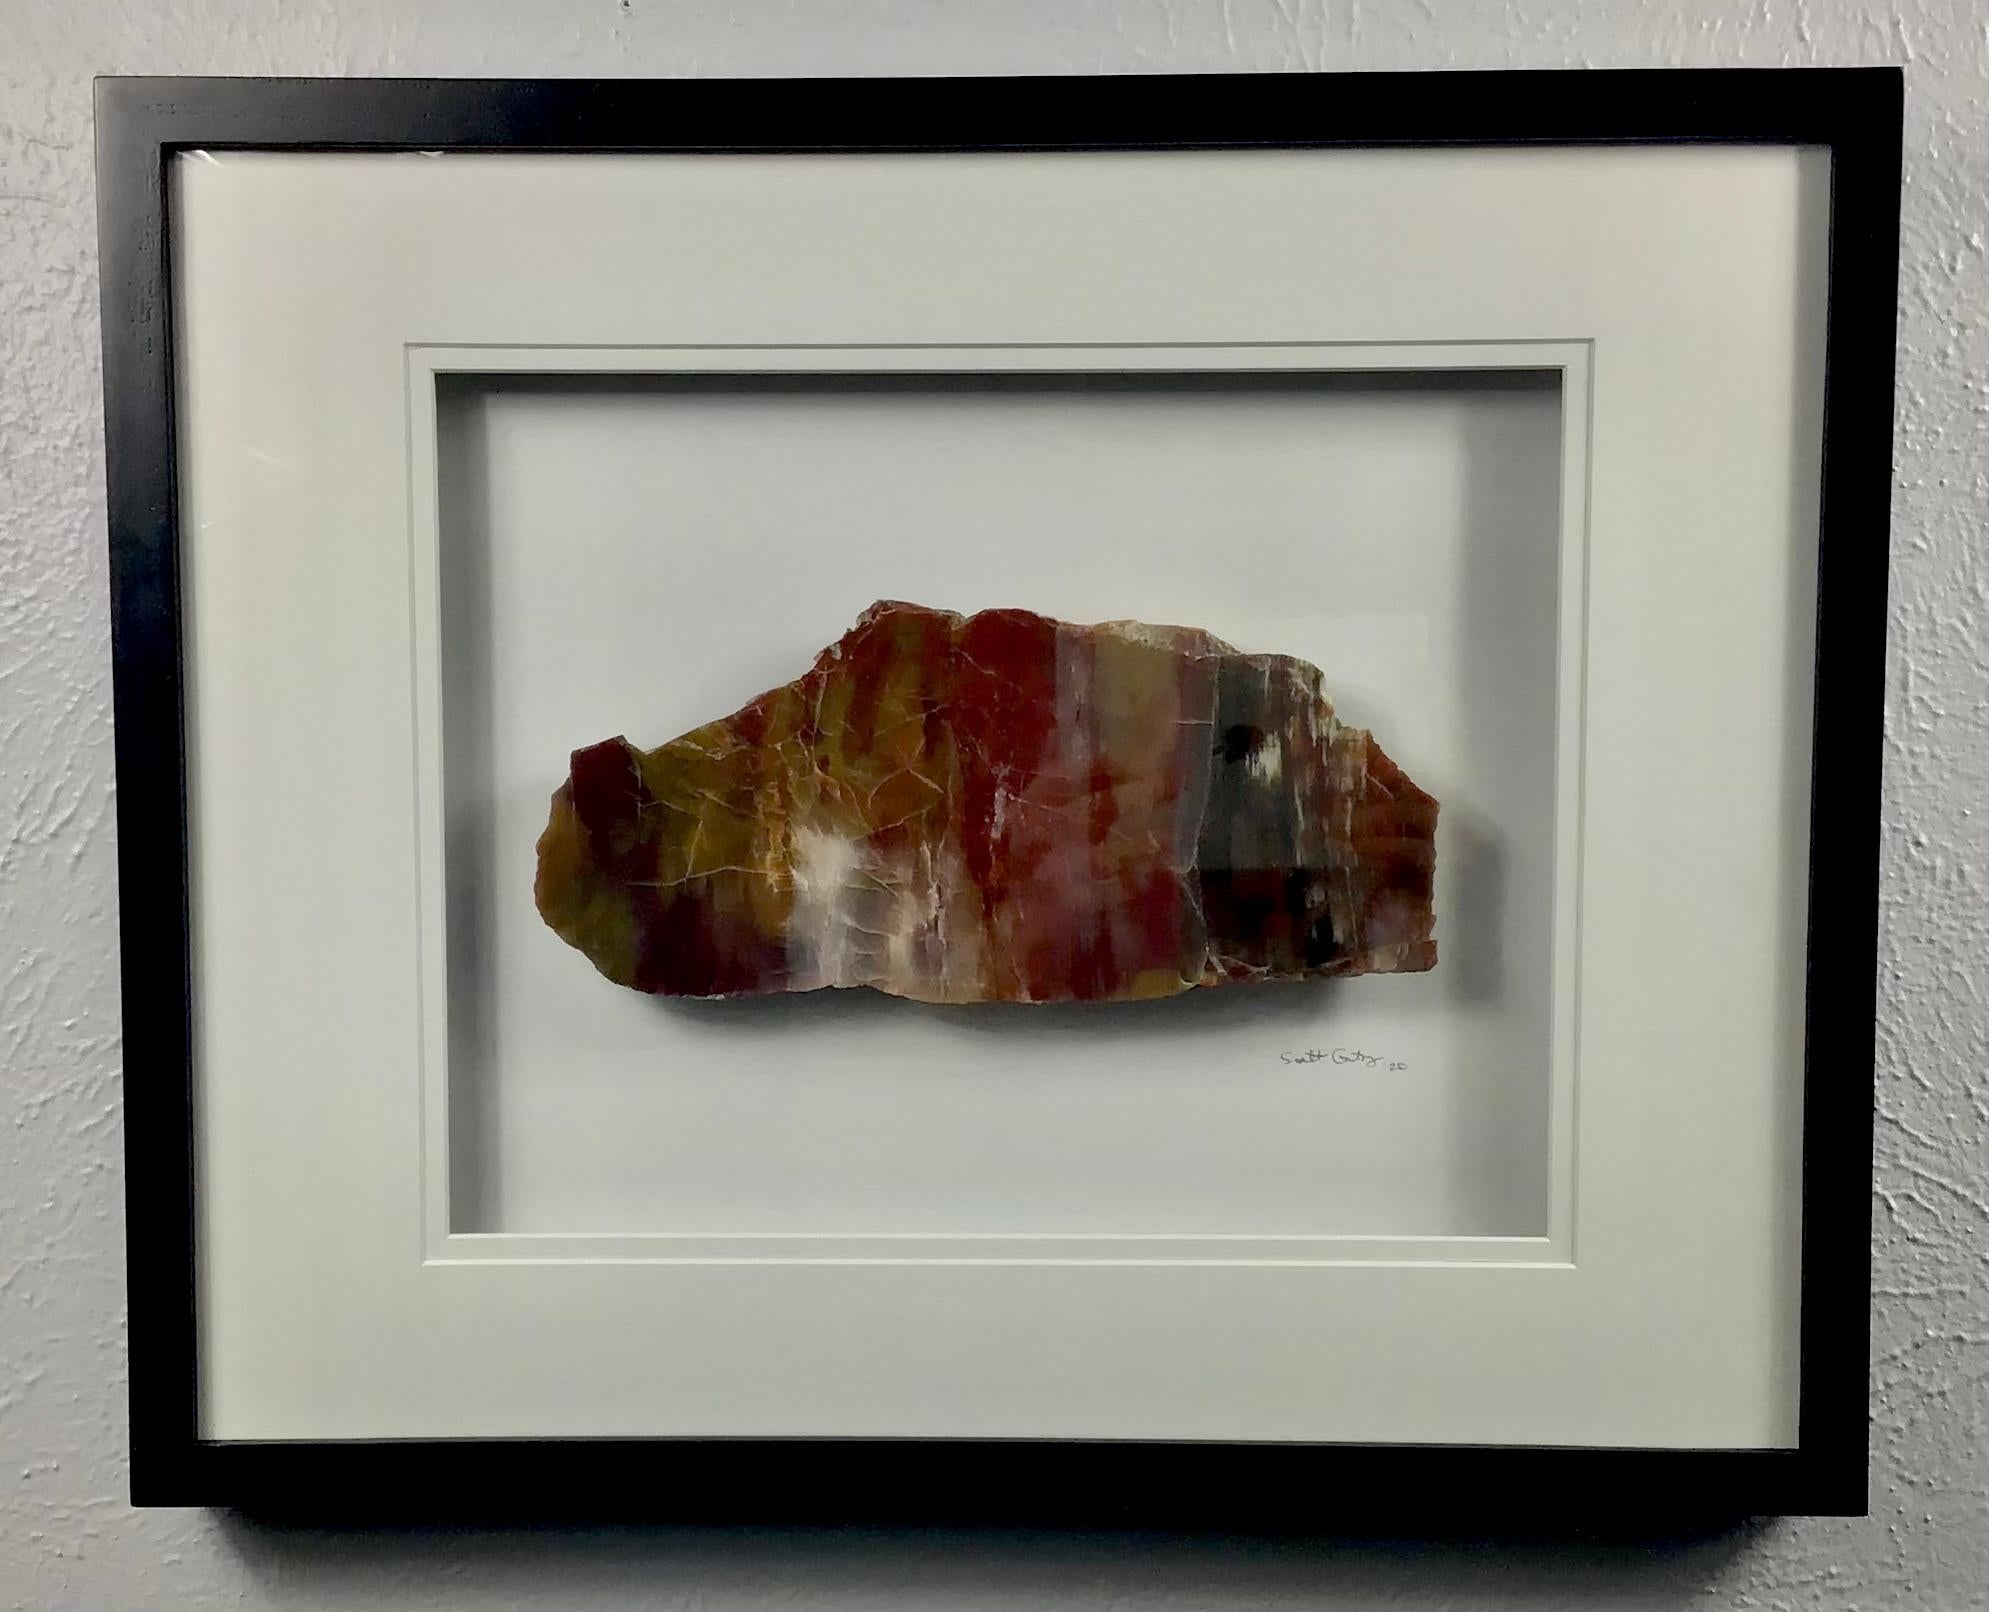 This 16x20 inch (17H x 21W x 1.375D inches framed) Arizona Rainbow Petrified Wood framed stone work of art has been created by Scott Gentry using real stones from his sculpture creation process. Each stone is lovingly and painstakingly hand-polished